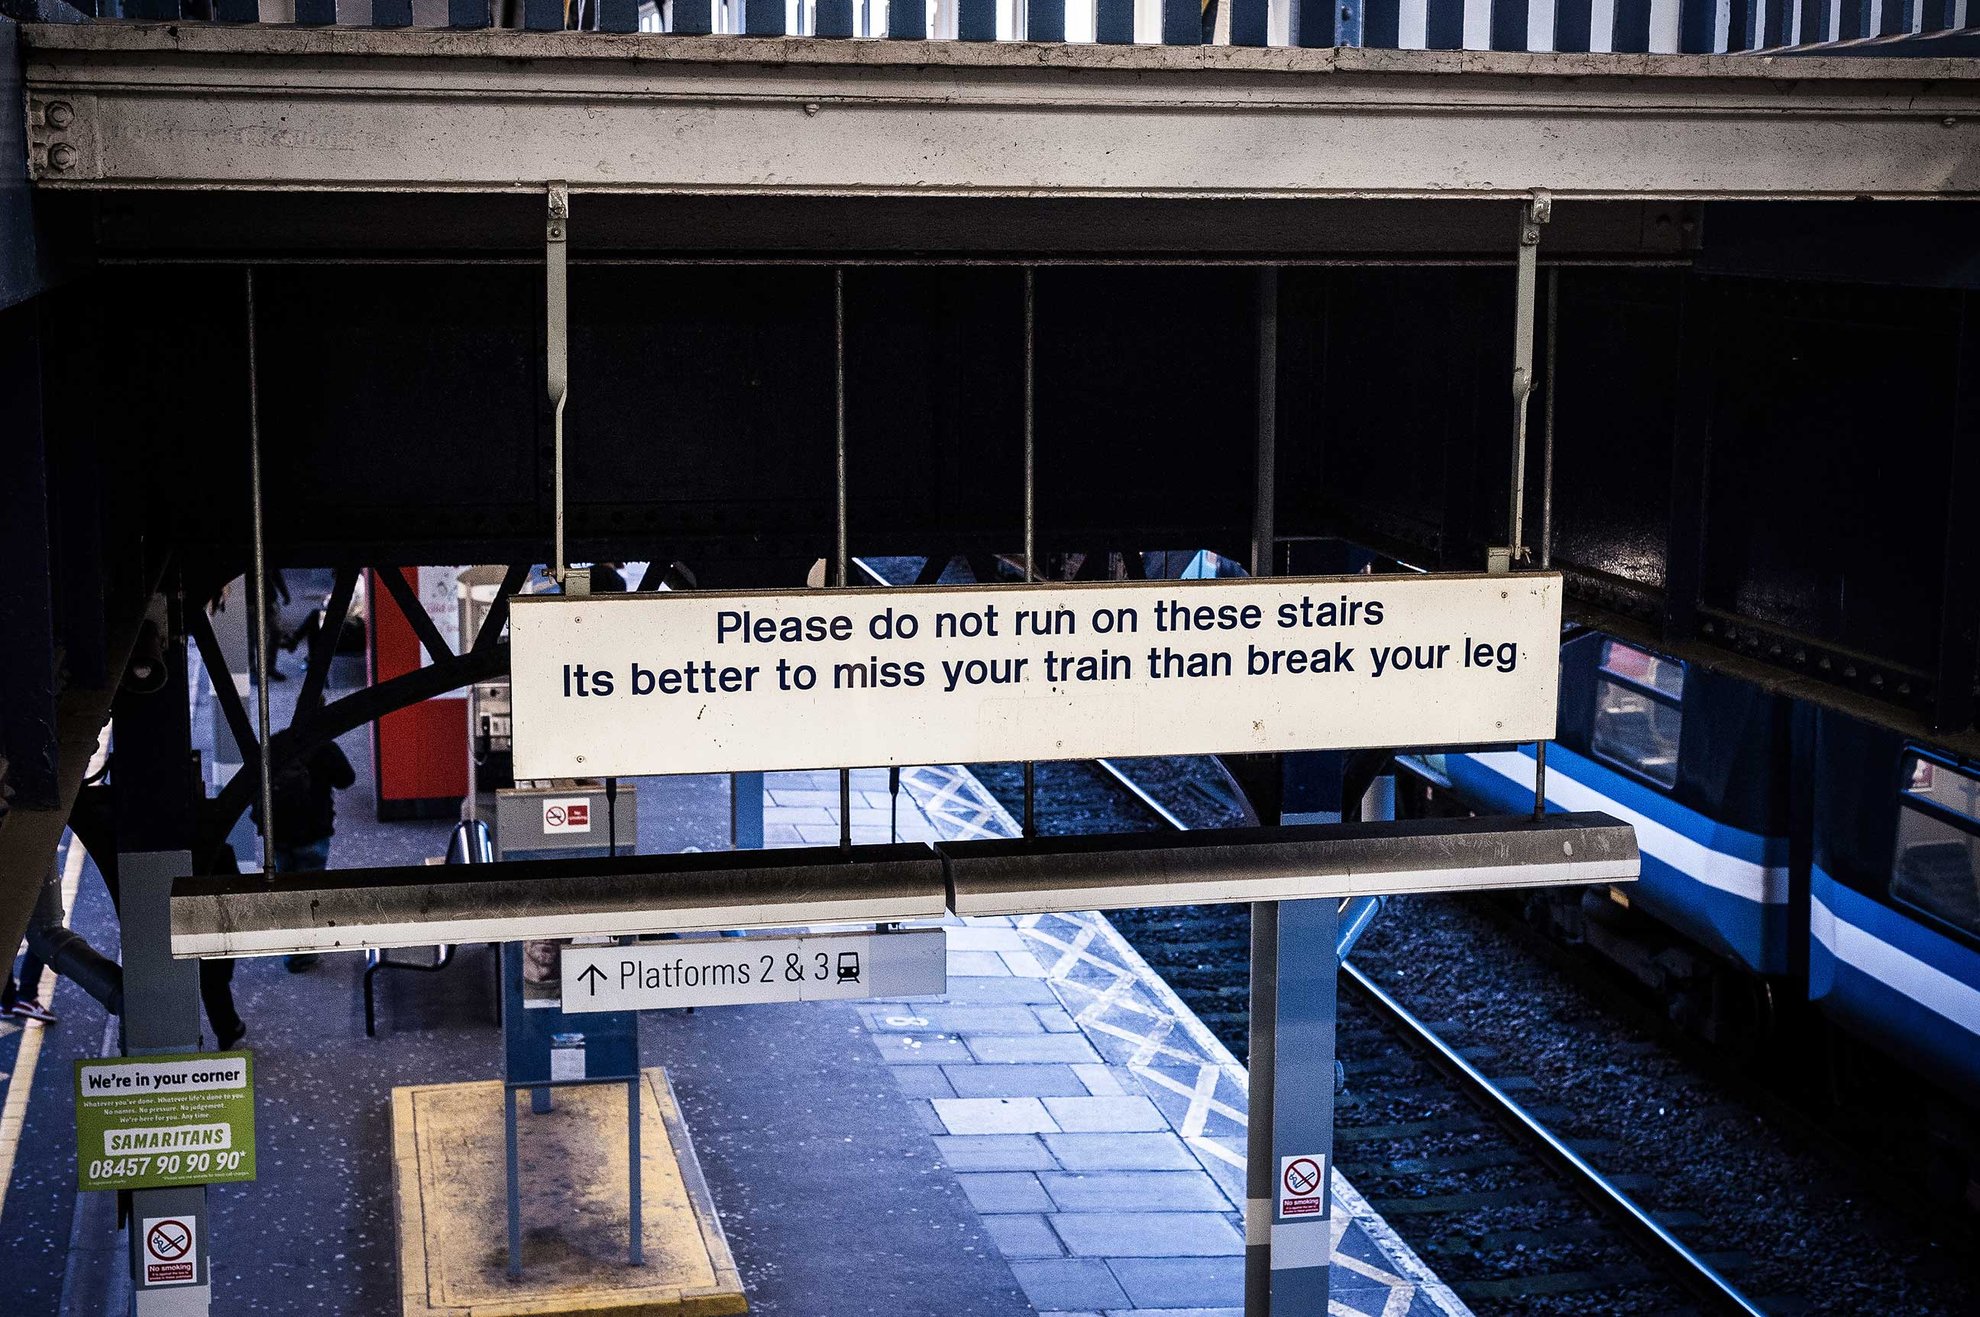 Don’t break your leg at Ilford Station